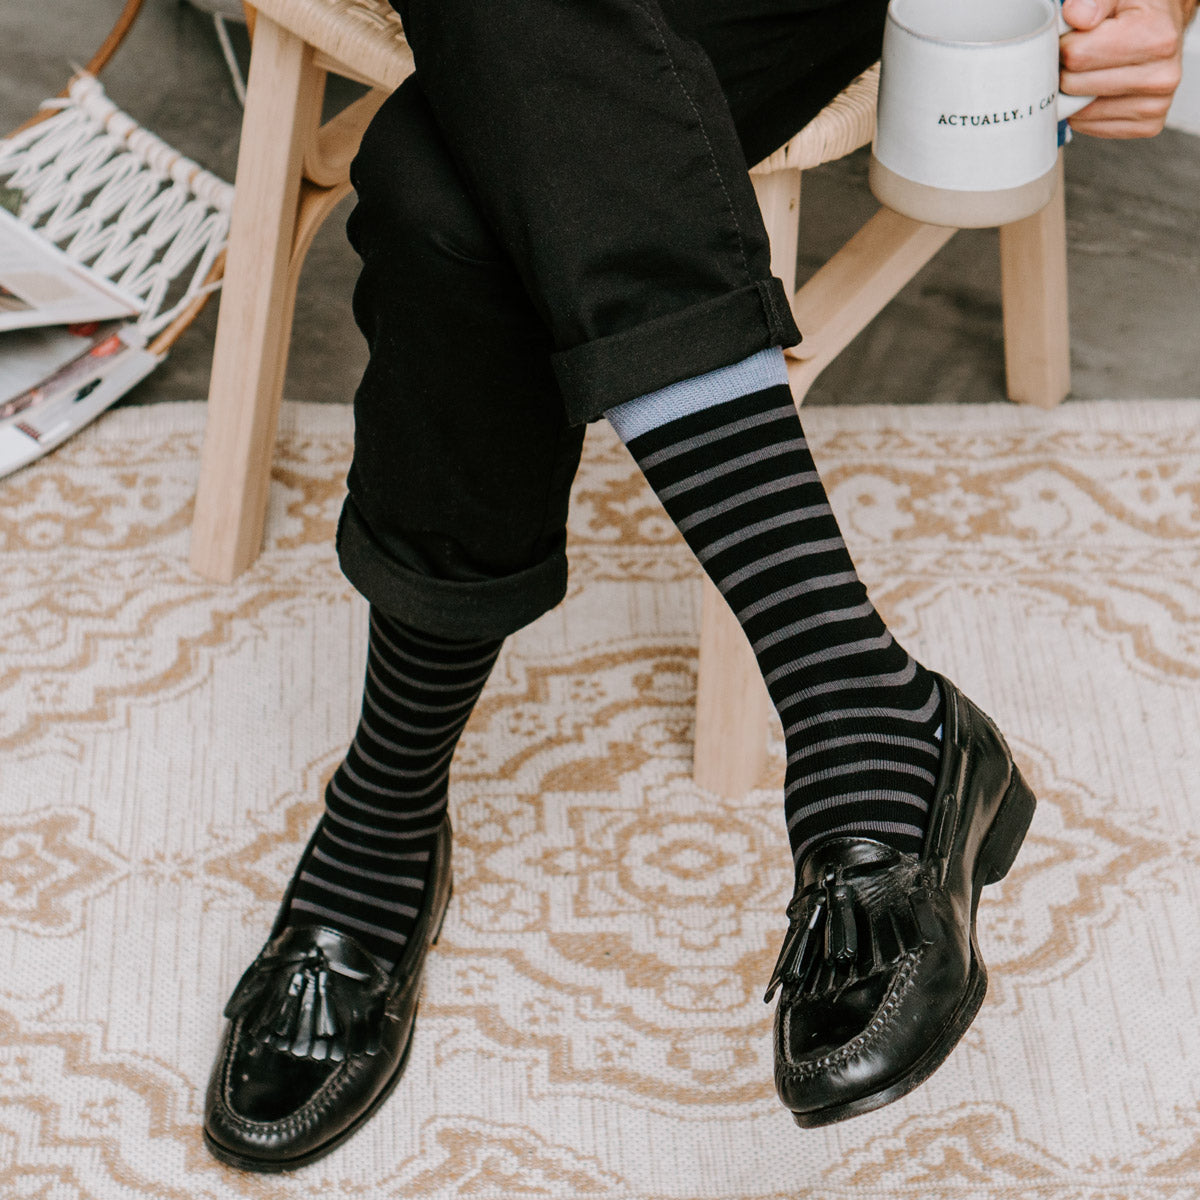 A man wears tassel dress shoes with striped bamboo socks in gray and black